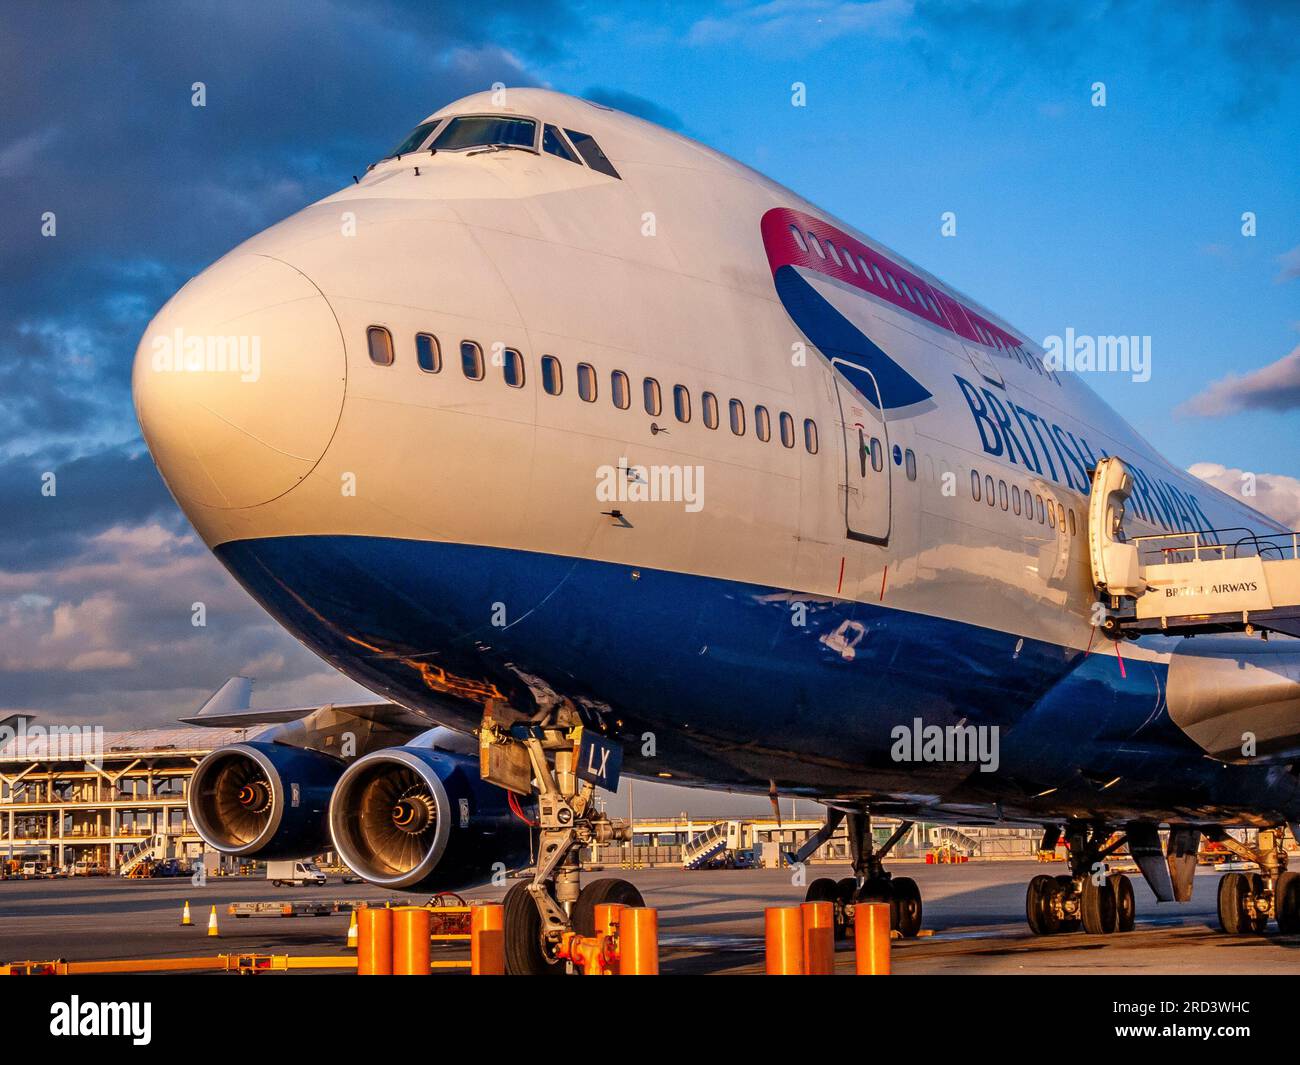 A British Airways Boeing 747-400 G-BNLX aircraft in the late afternoon sunshine at London Heathrow Airport ,UK Stock Photo